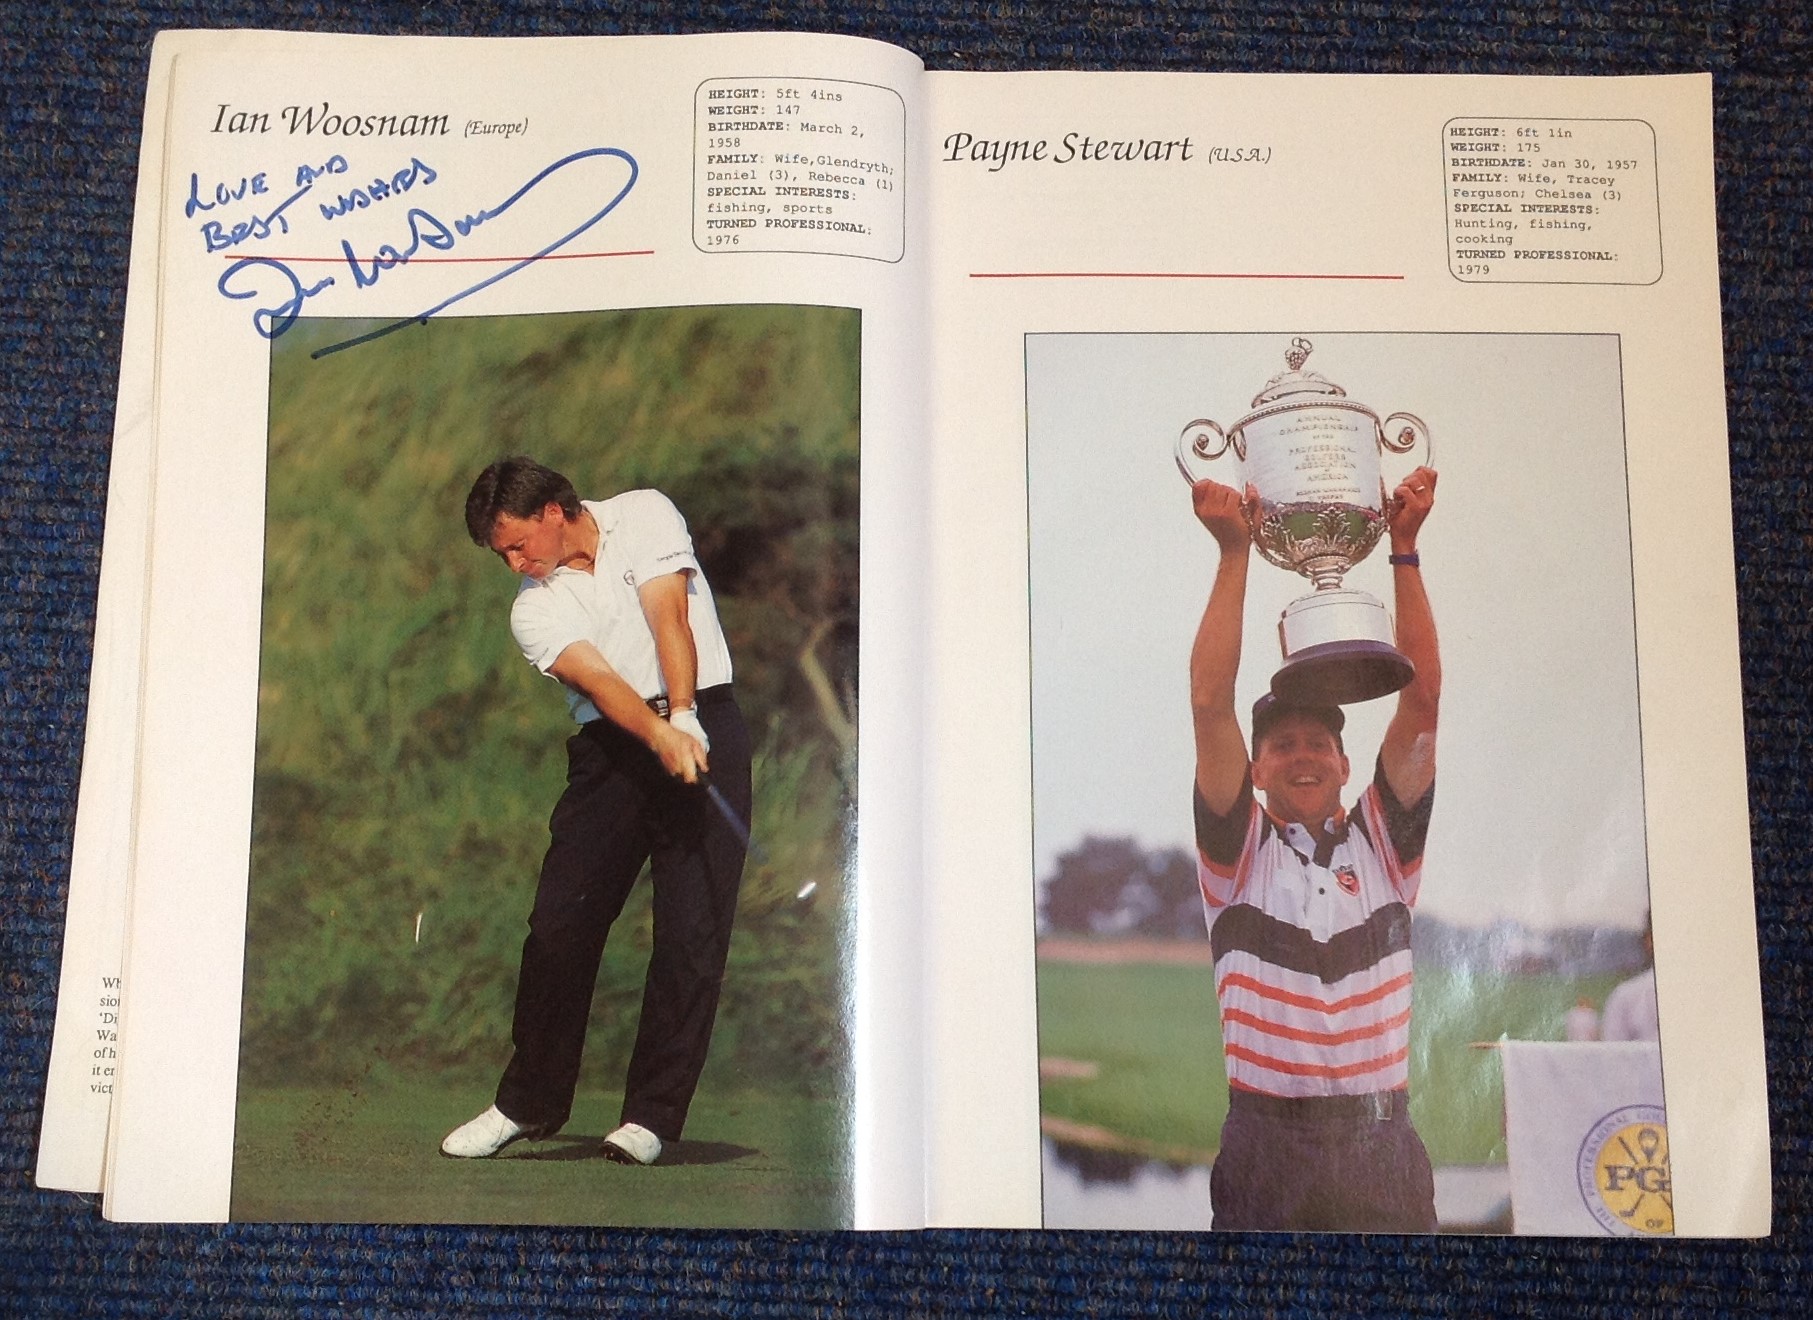 Golf 1989 Ryder Cup signed Golfers News paperback book 12 signatures includes legends of the game - Image 2 of 5